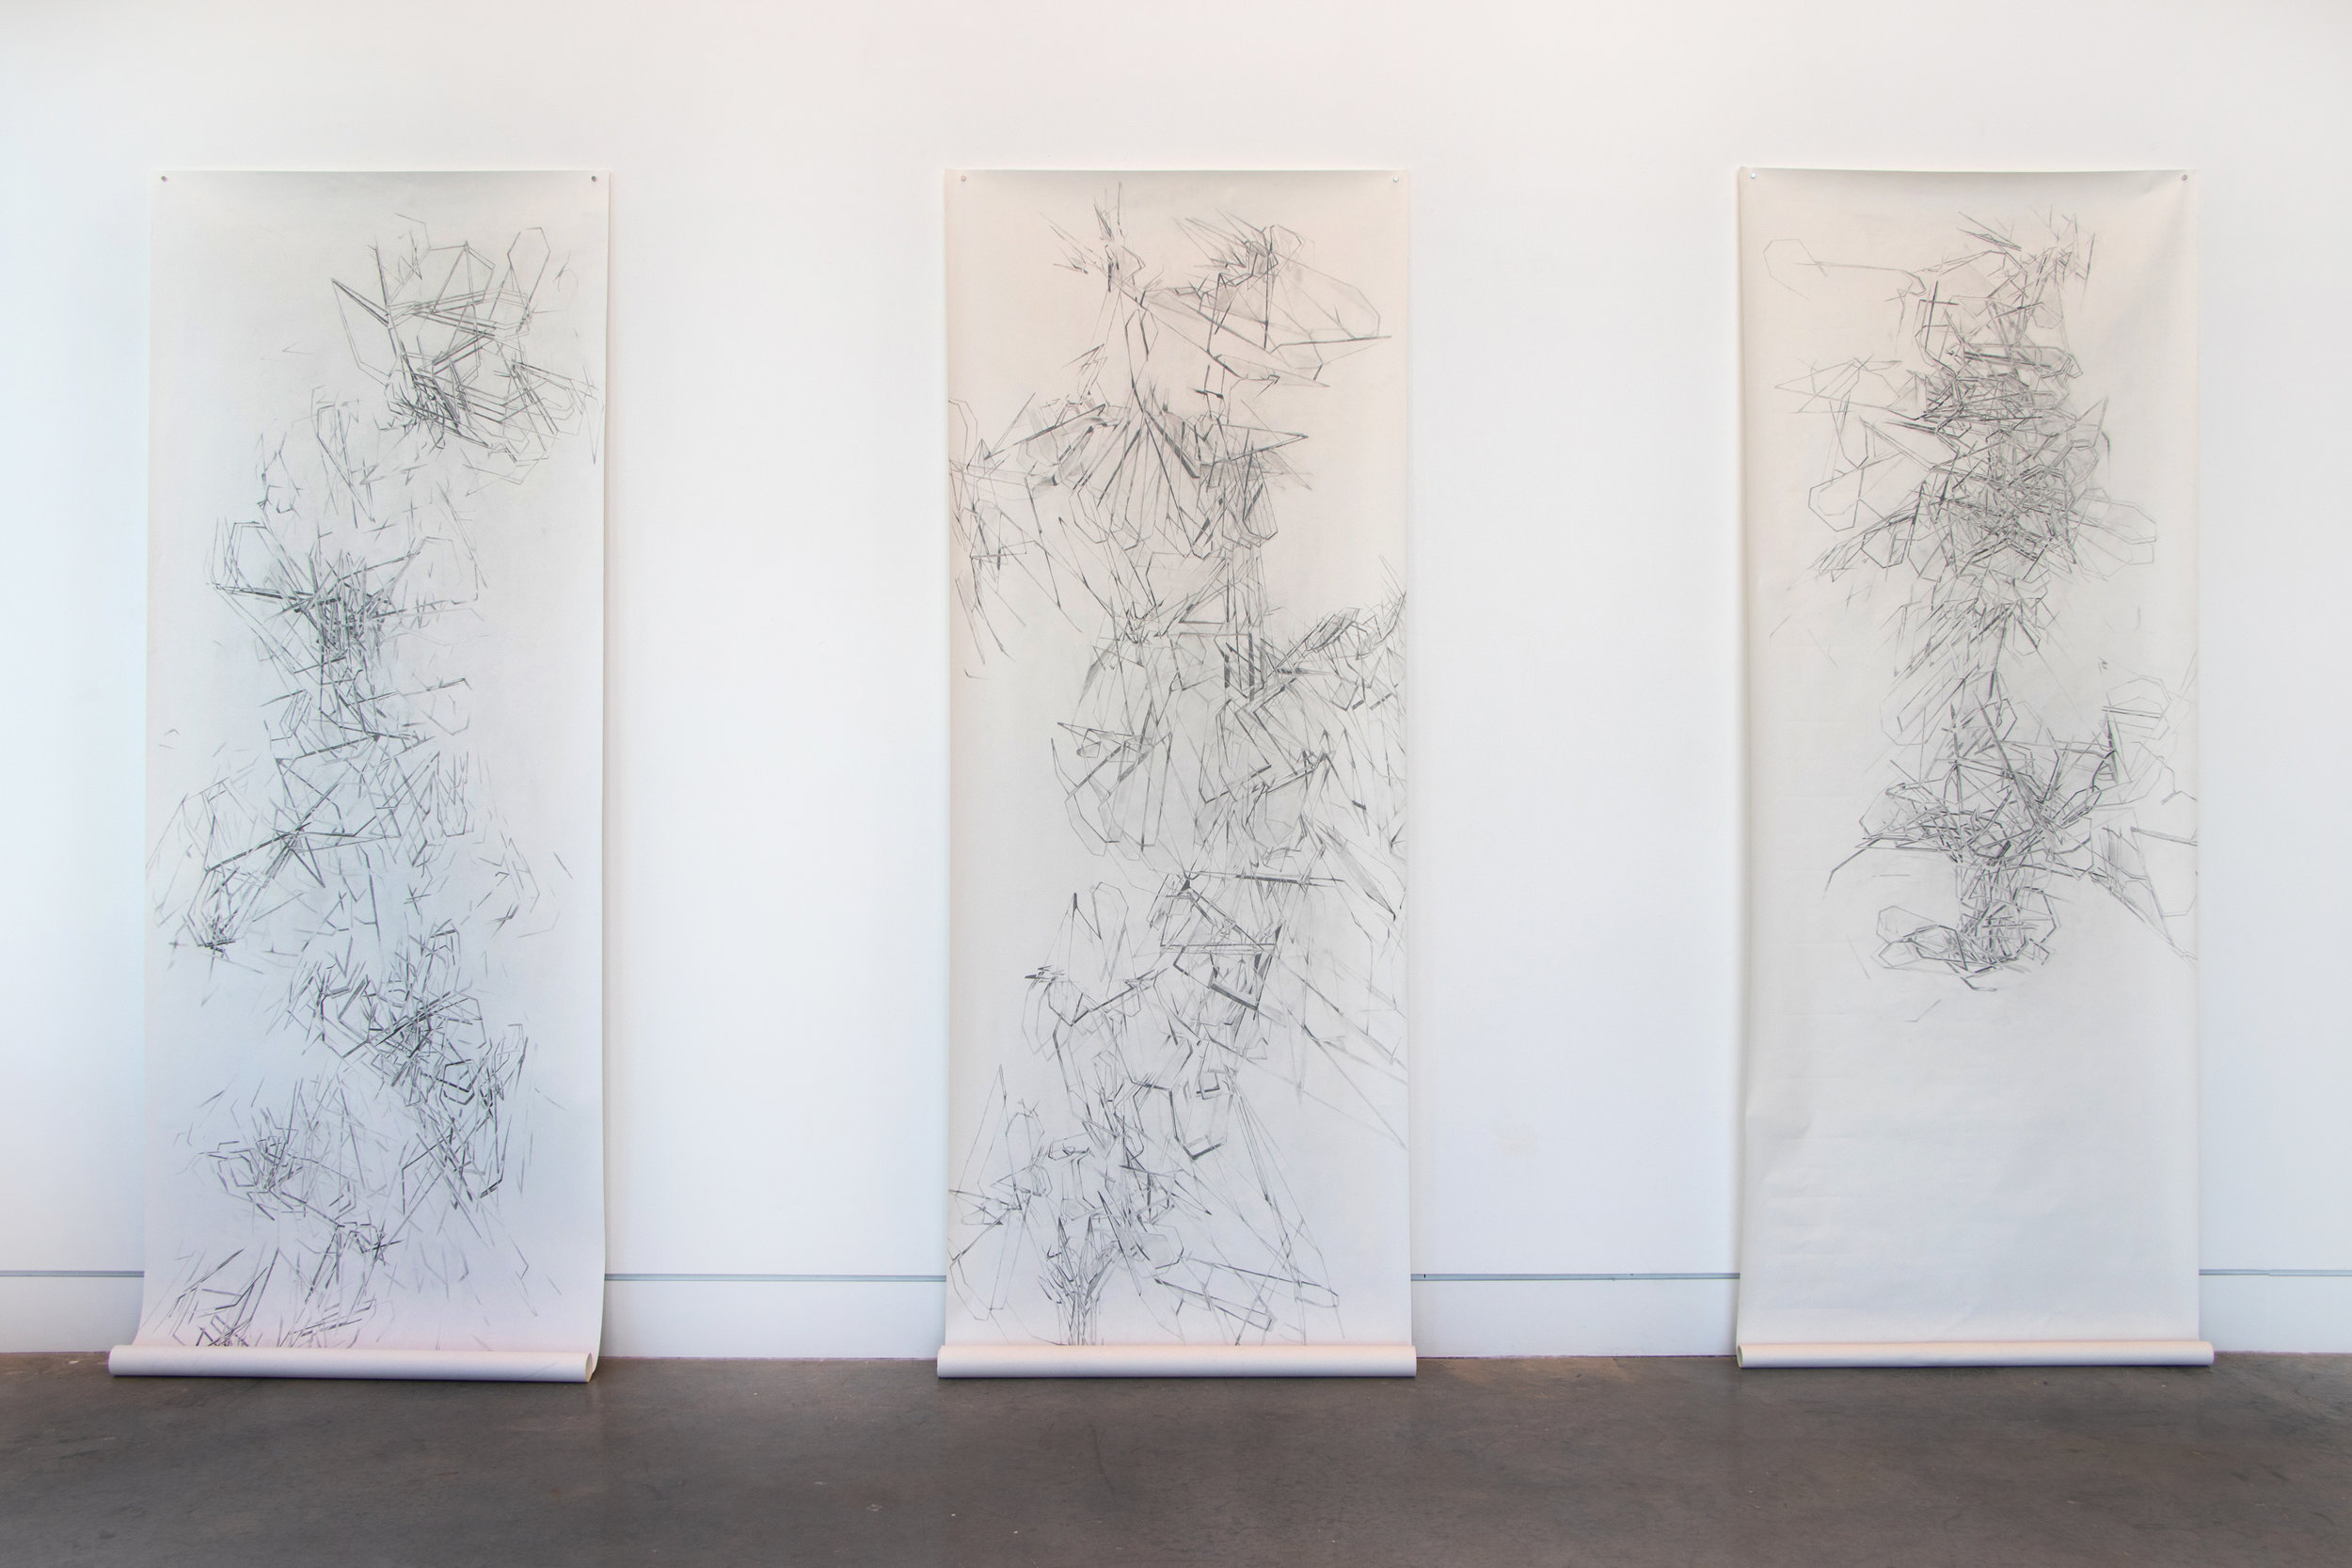   Filtered Conversations with Time  (2018) Graphite on Paper. 36 x 100 inches each.  